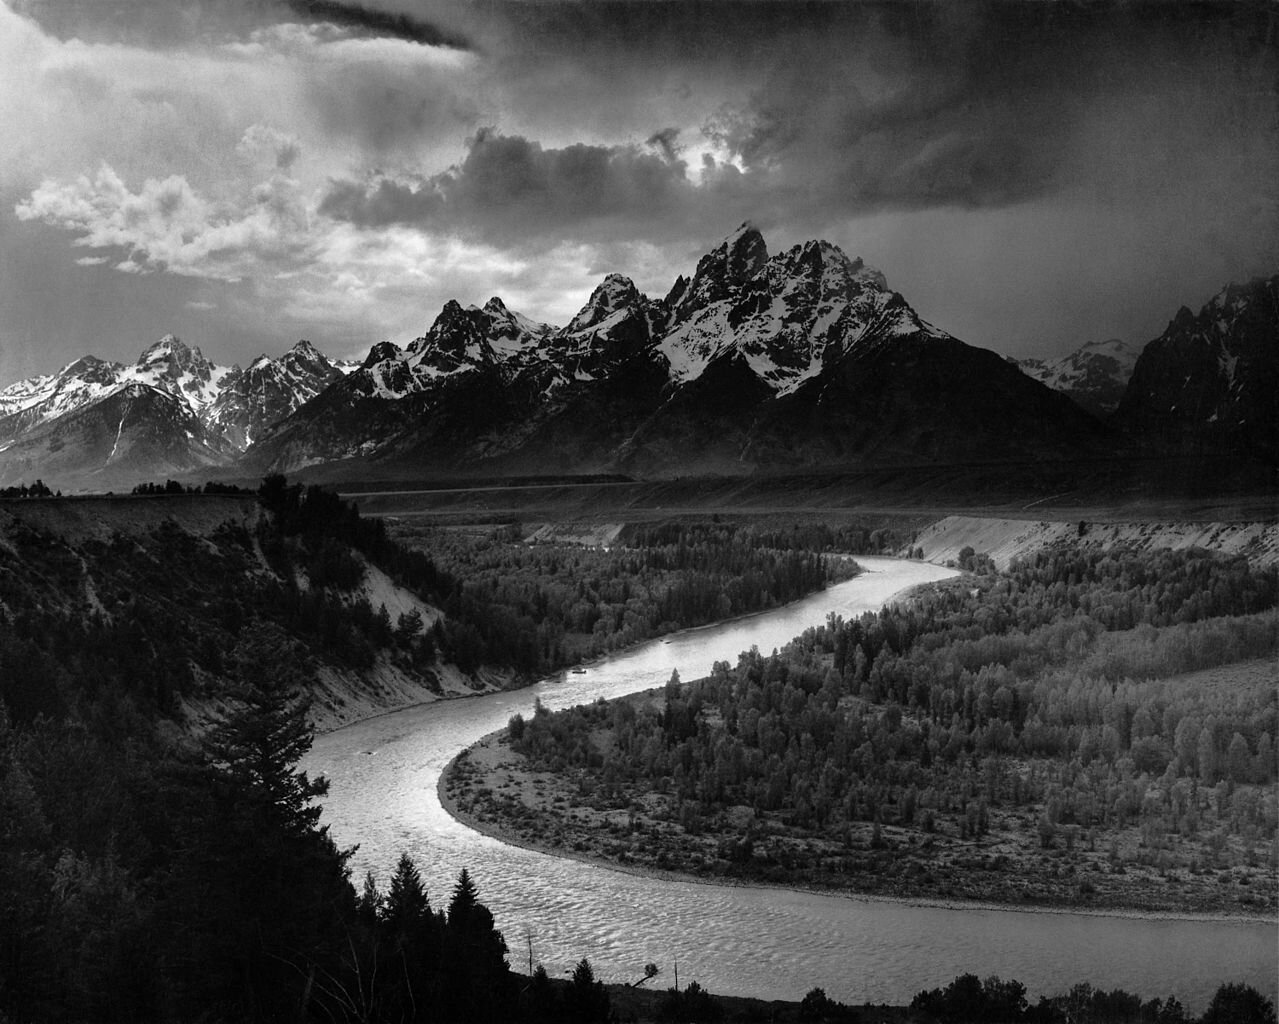 This is the iconic 1942 photograph, taken by legendary American photographer Ansel Adams.